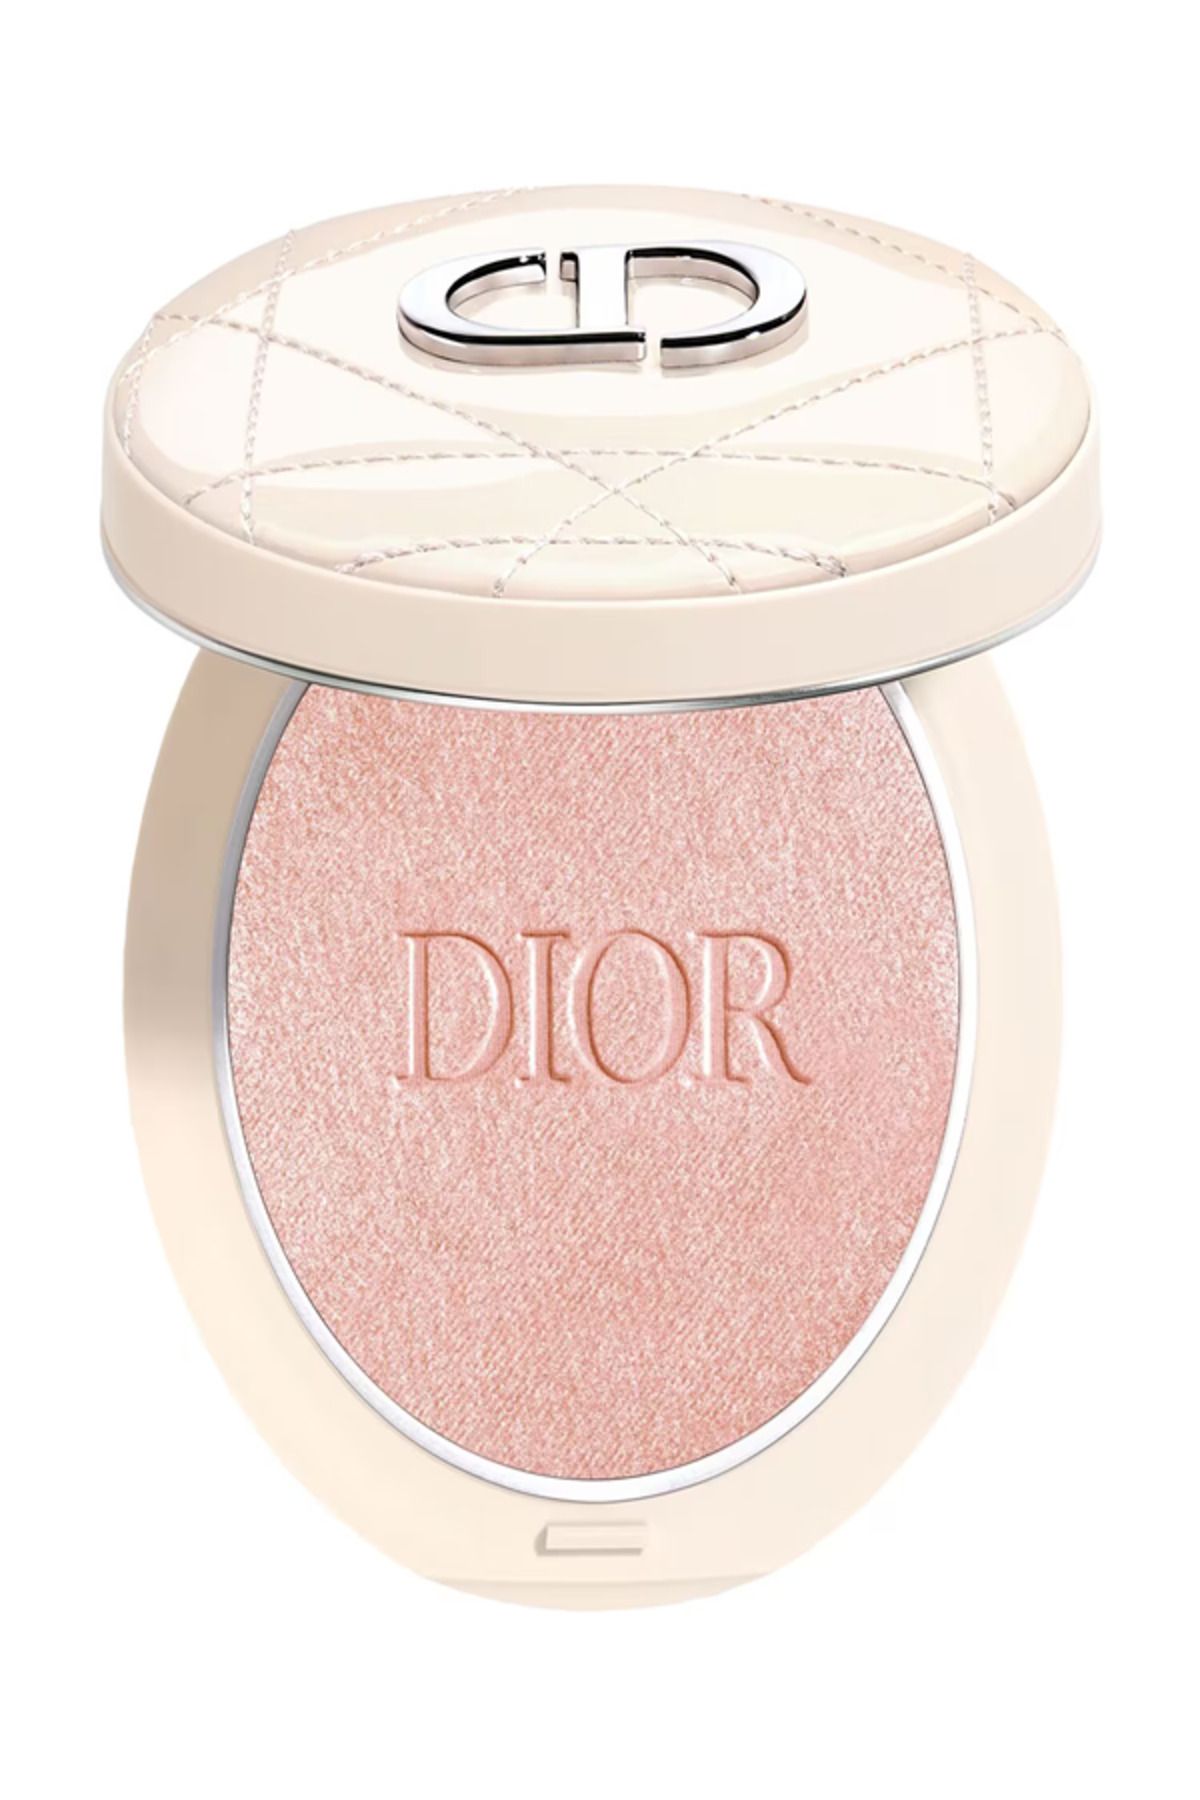 Dior FOREVER COUTURE LUMİNİZER HİGHLİGHTER - ILLUMİNATİNG POWDER PSSN2436